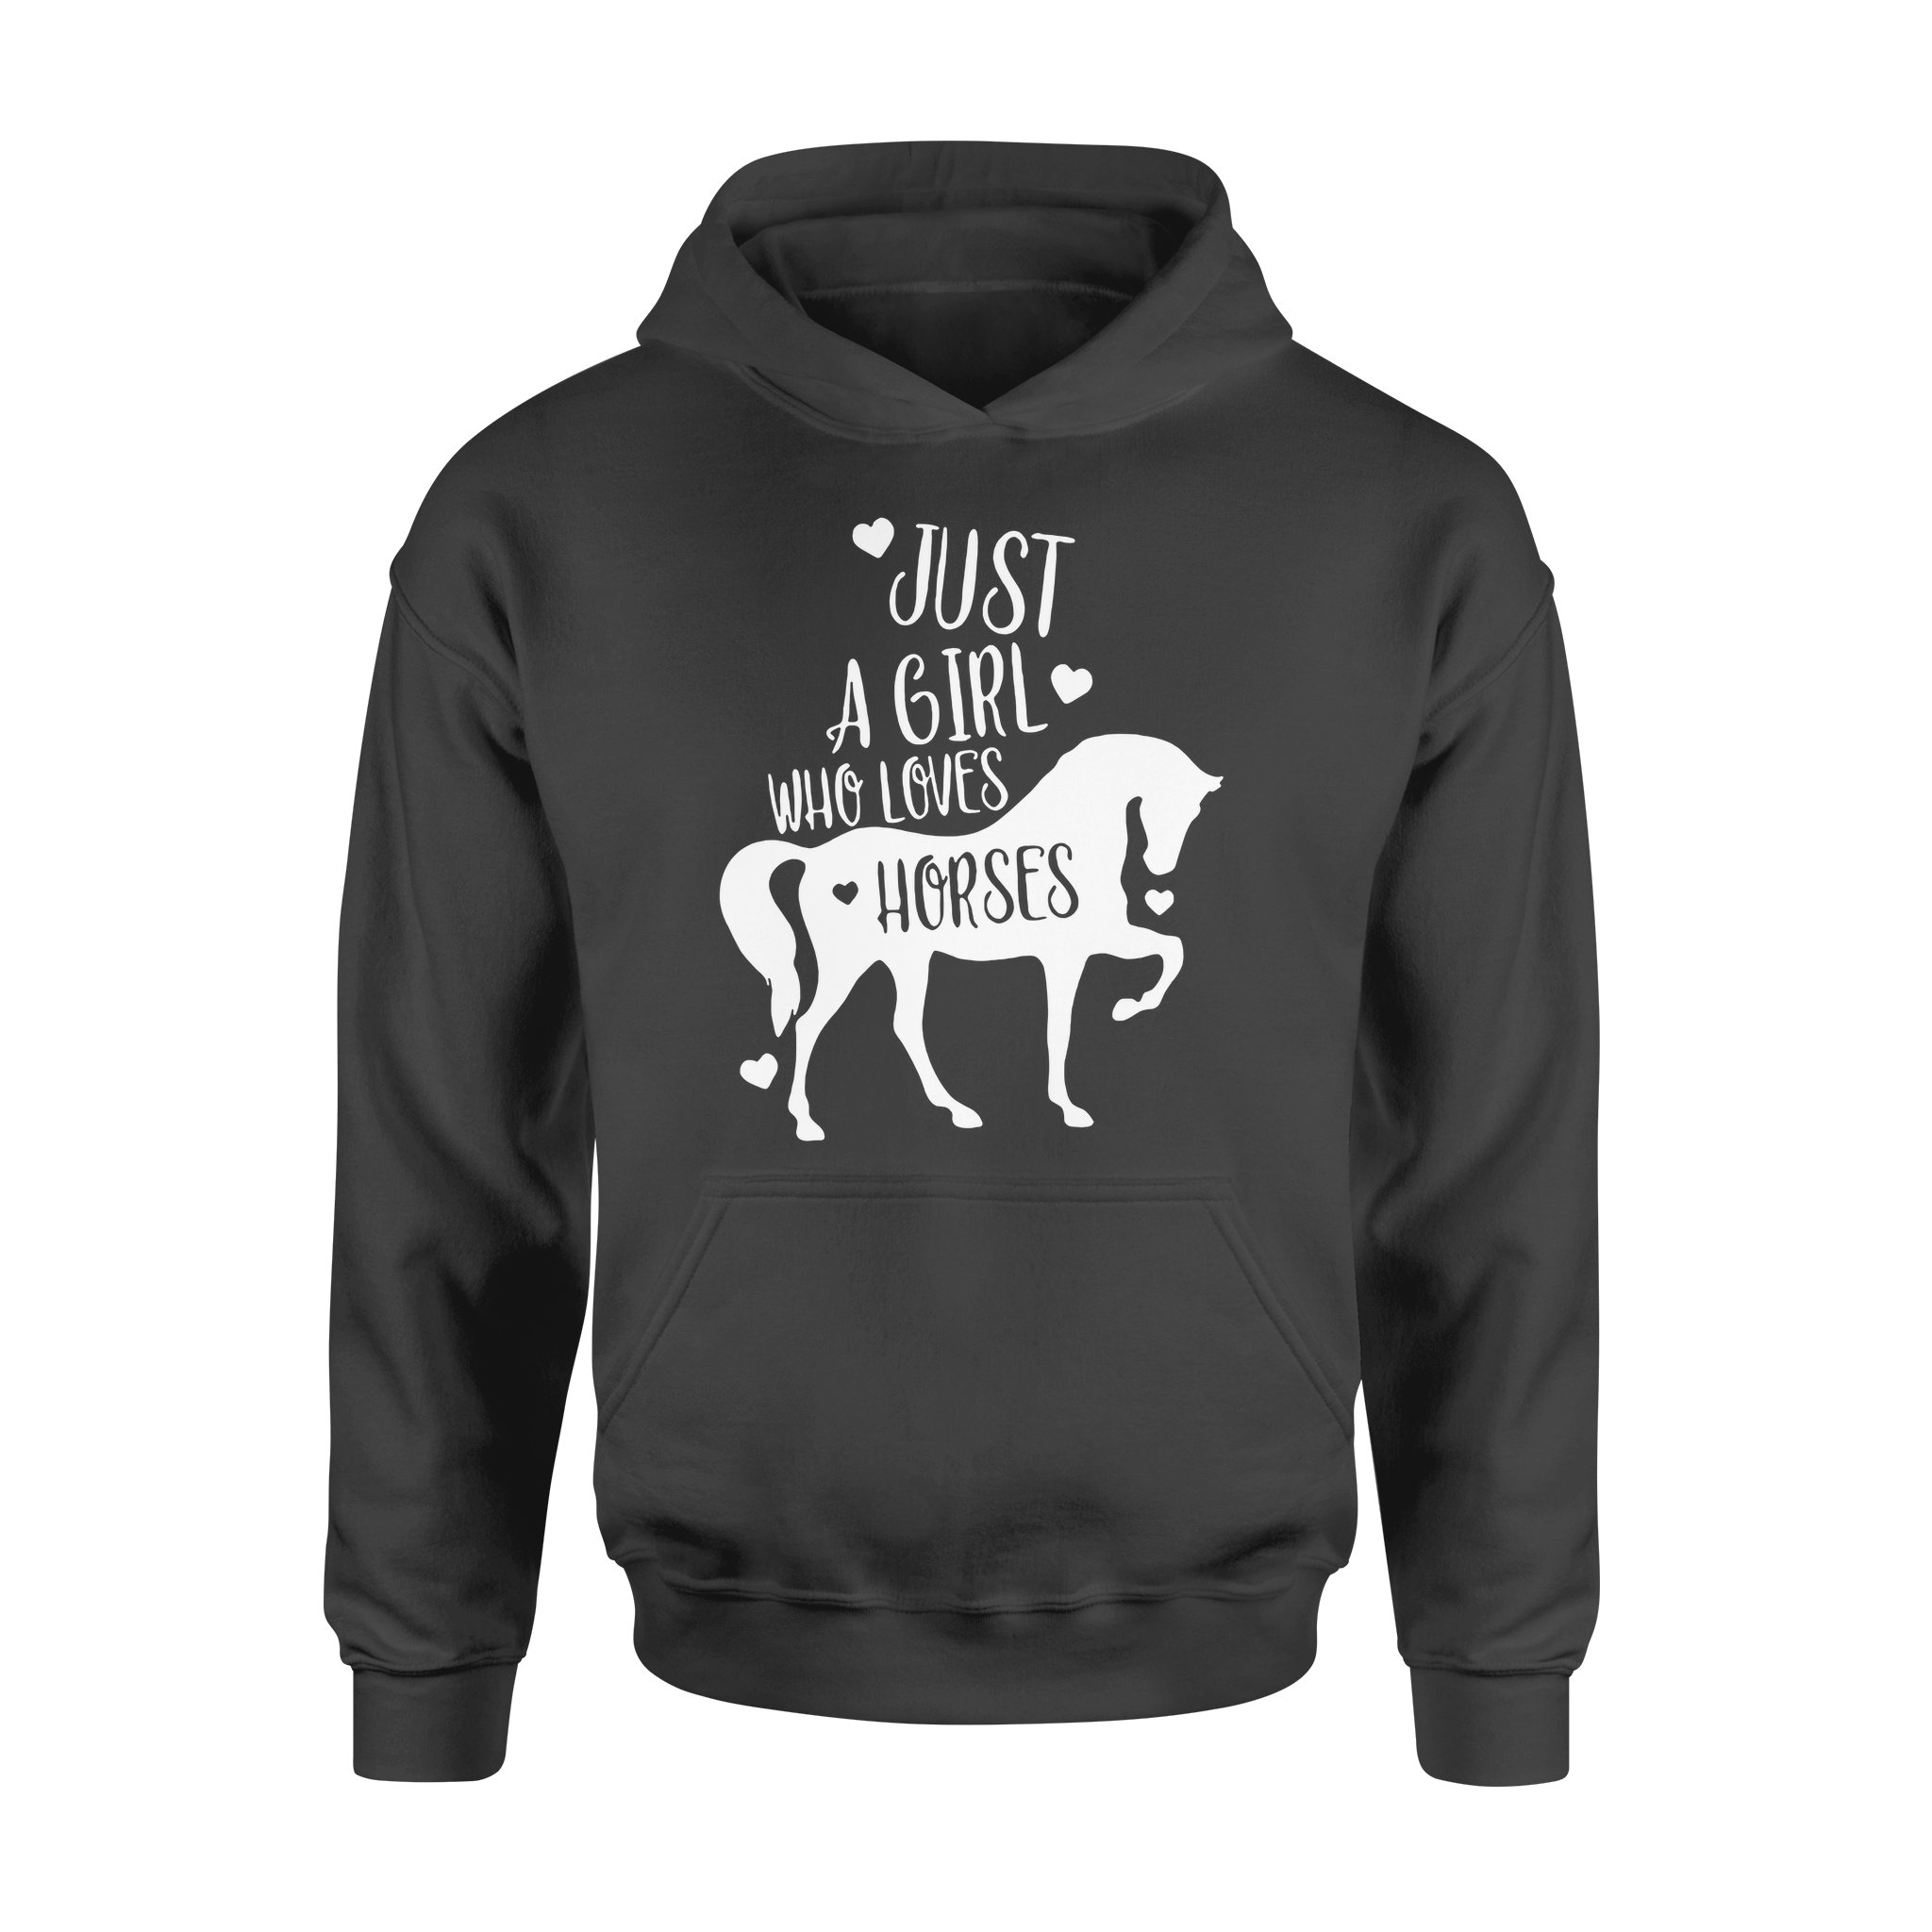 Just A Girl Who Loves Horses, Horse Girl, Farm Lover, Horse Riding, Horse Hoodie – Fsd1468D06